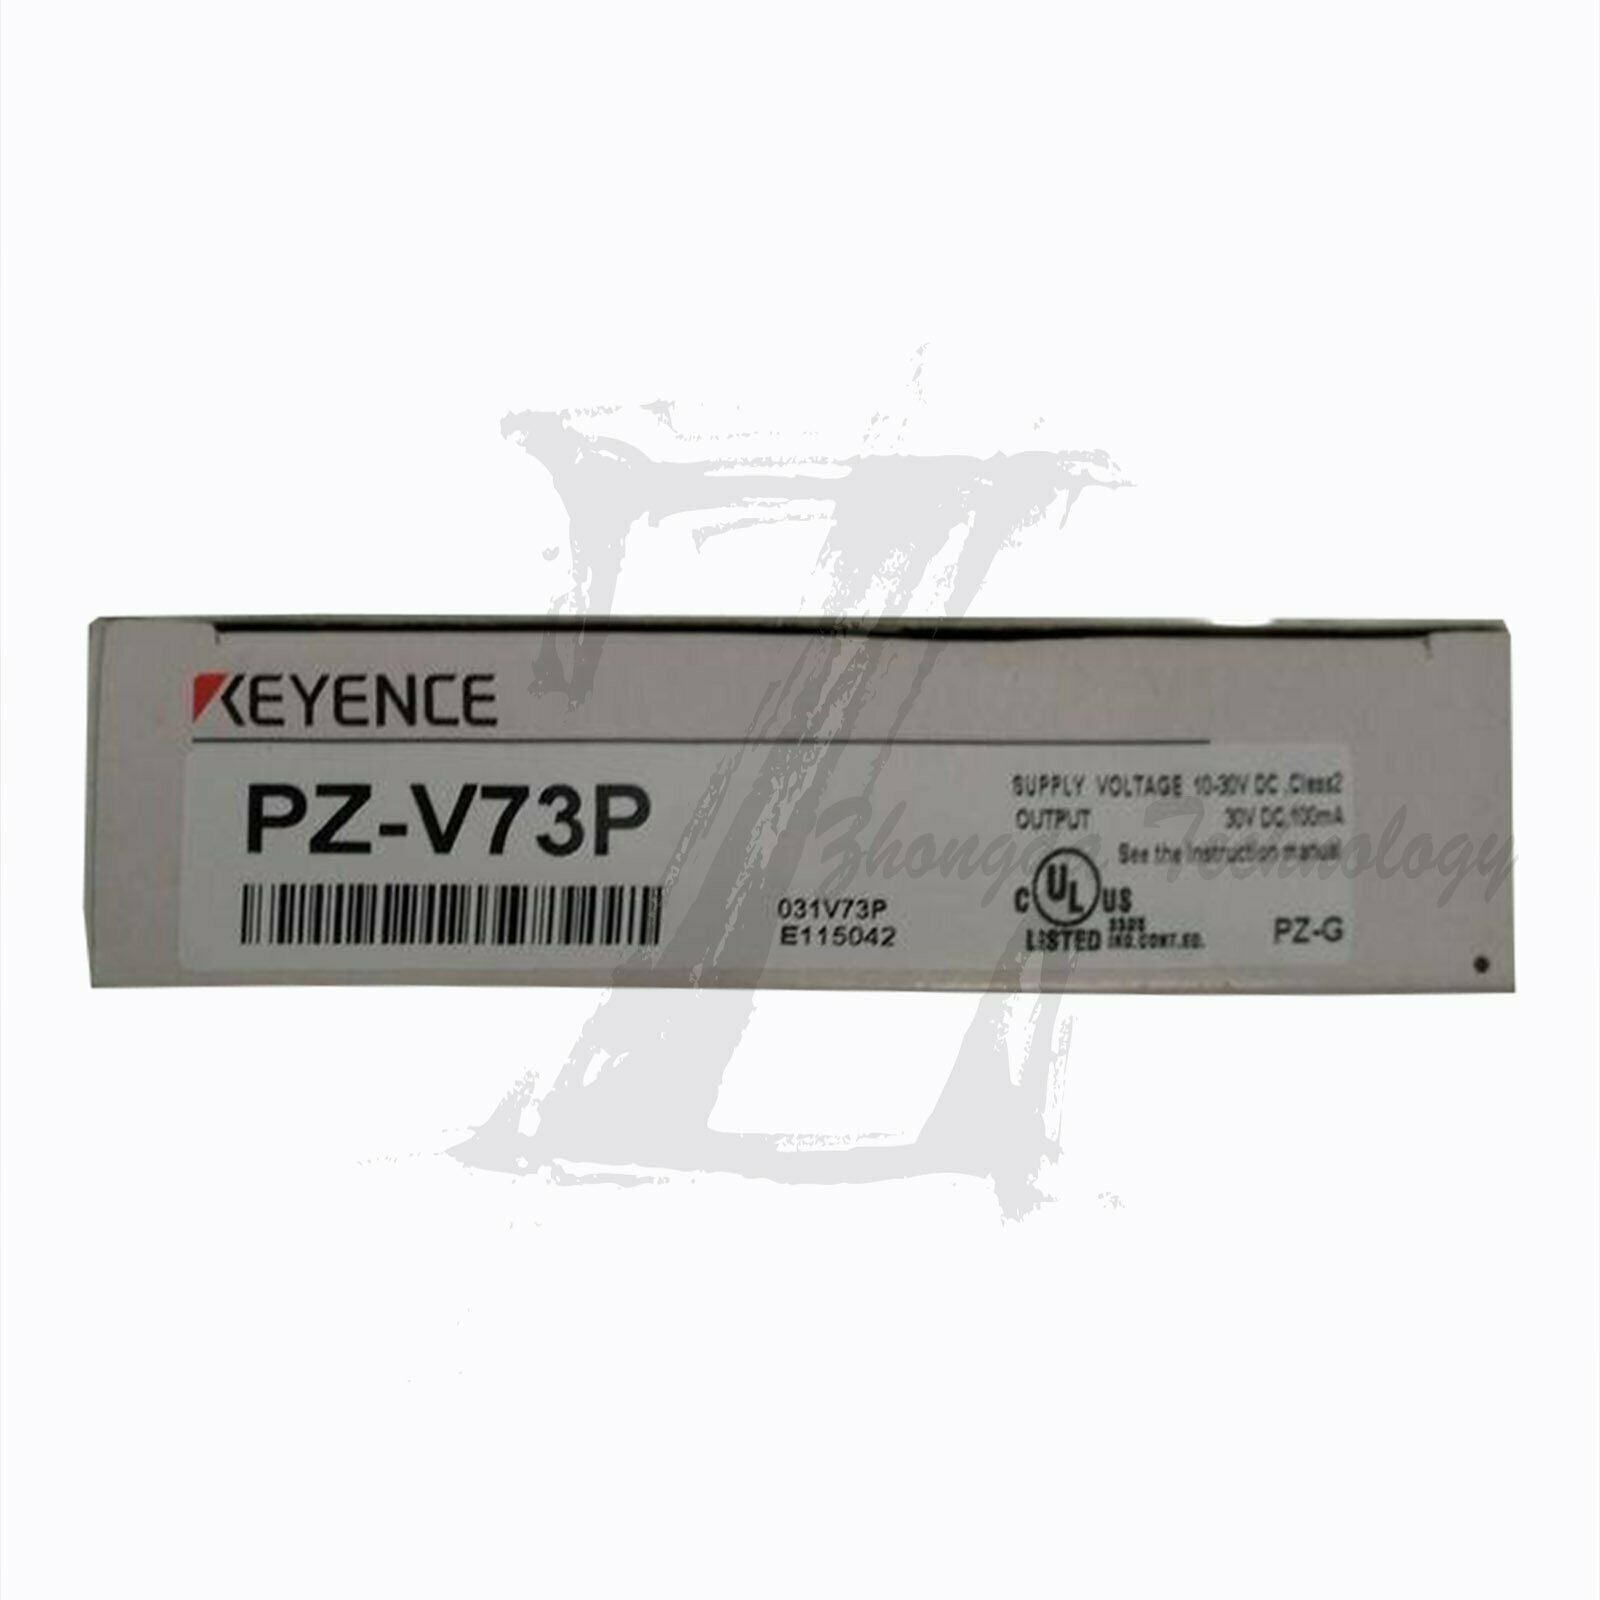 1pcs NEW KEYENCE KV-N40AT Programmable Controllers KOEED 500+, 90%, import_2020_10_10_031751, Keyence, Other